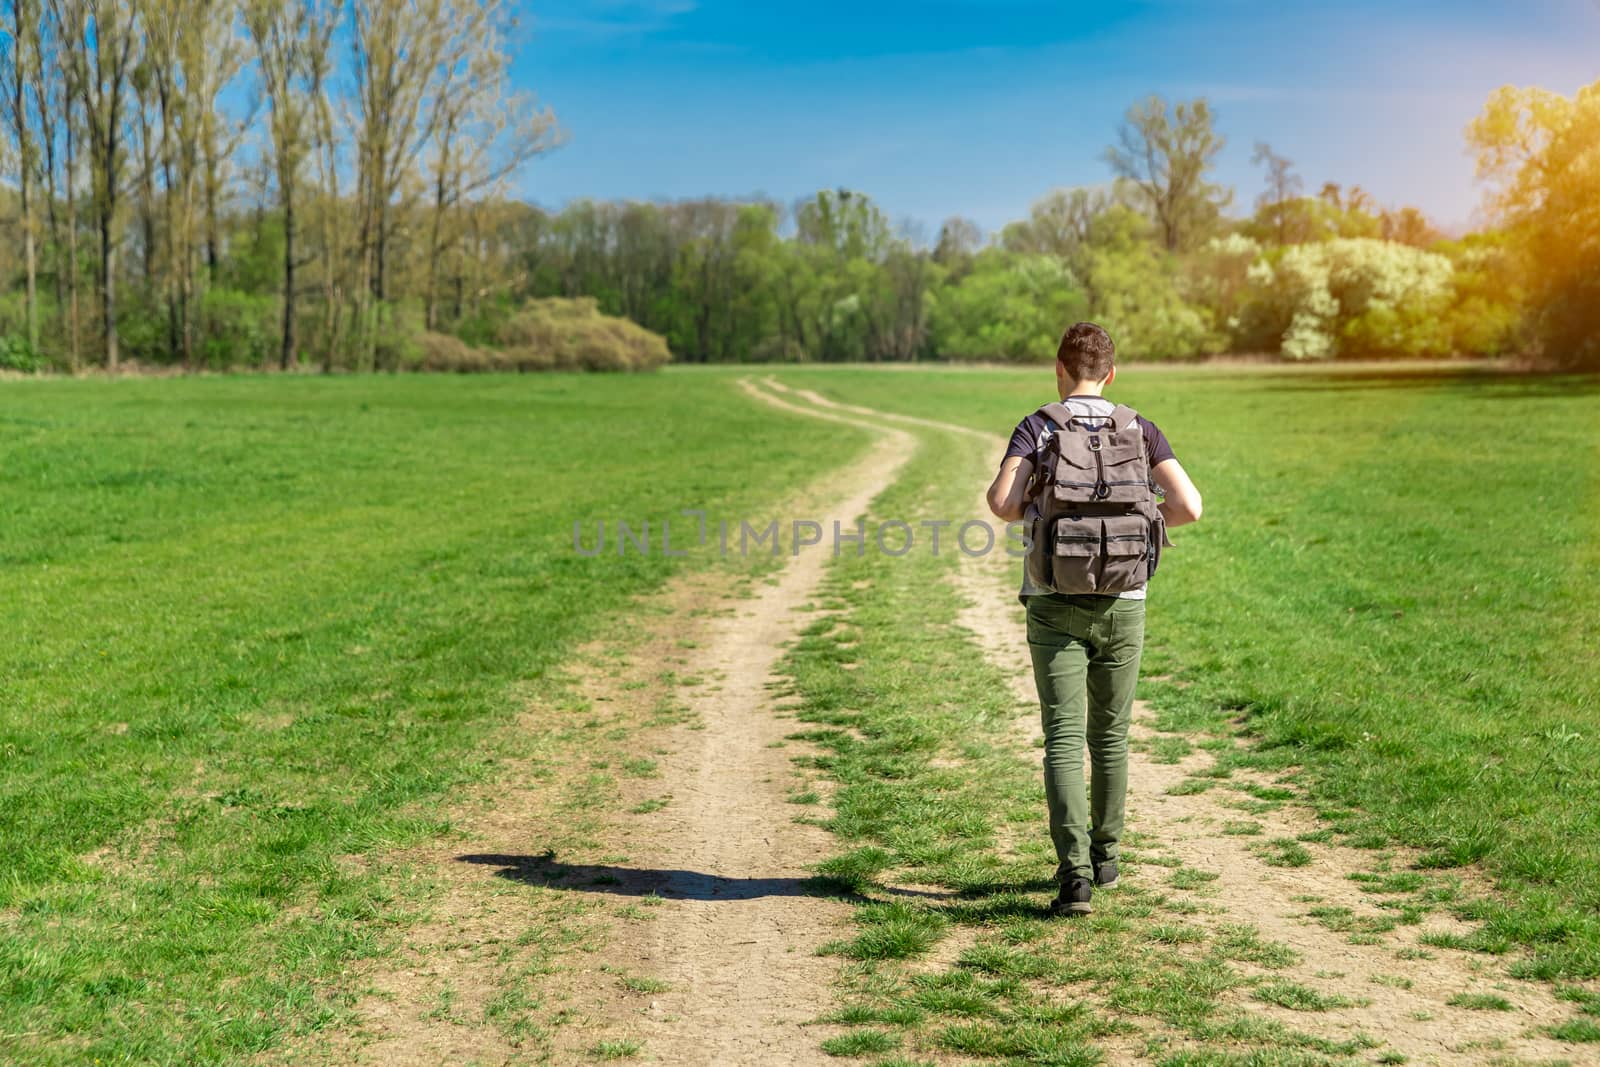 a tourist with a backpack on his back walks along a dirt road towards the forest.